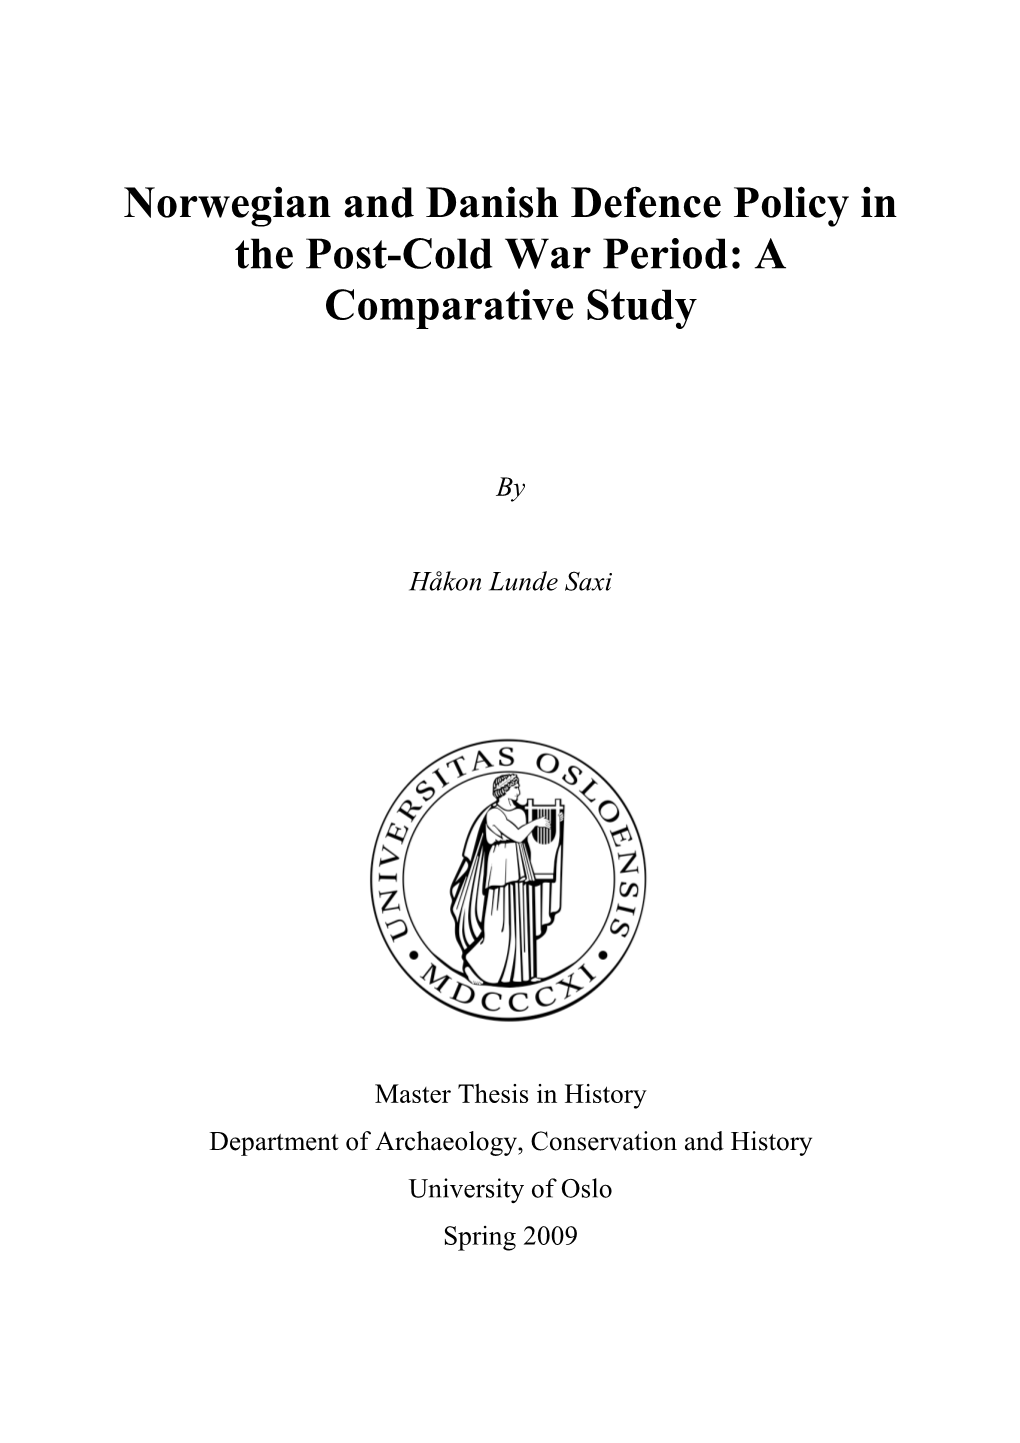 Norwegian and Danish Defence Policy in the Post-Cold War Period: a Comparative Study